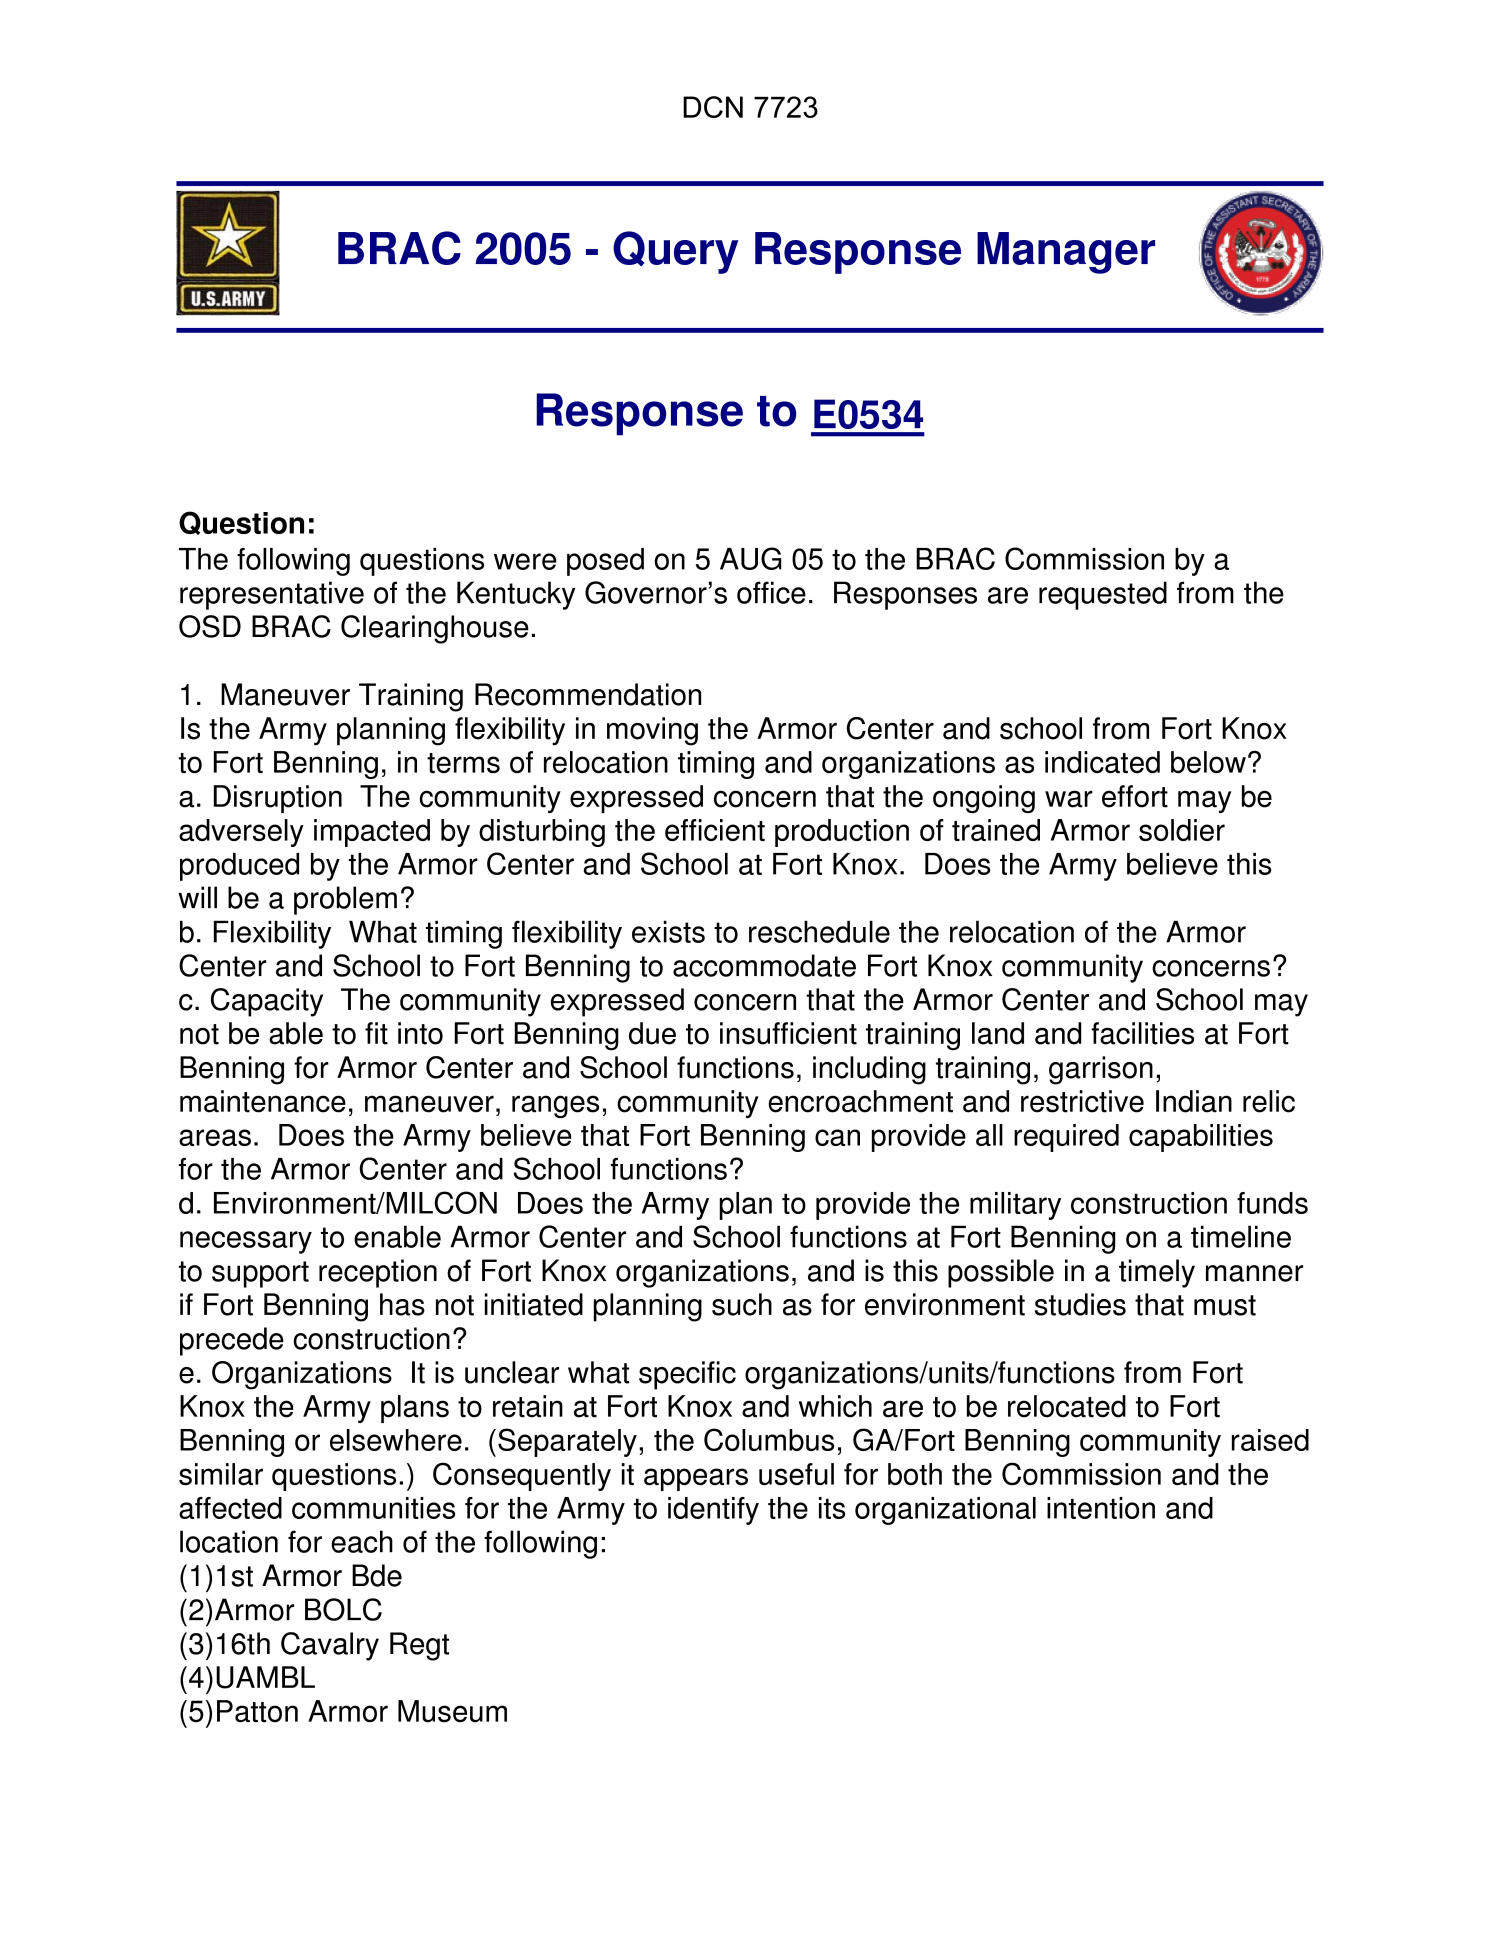 Department of Defense Clearinghouse Response: DoD Clearinghouse response to a letter from the BRAC Commission regarding Ft. Knox
                                                
                                                    [Sequence #]: 1 of 5
                                                